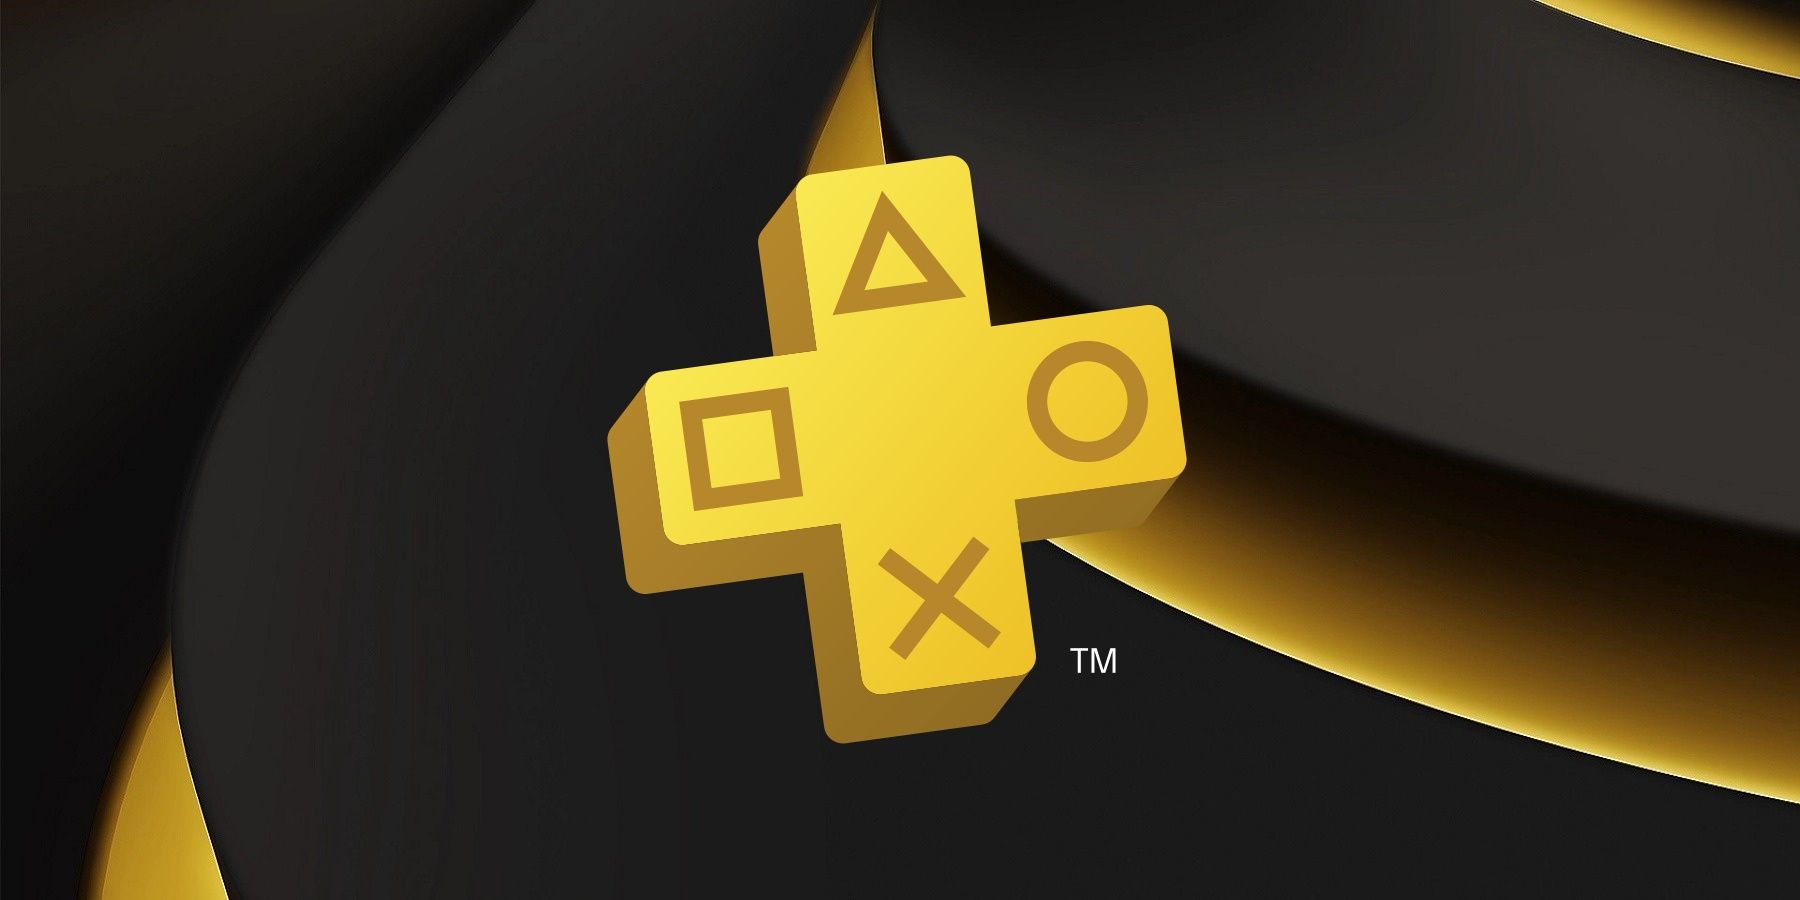 How to get free PS PLUS PREMIUM trial on PS4/PS5 (NO CREDIT CARD